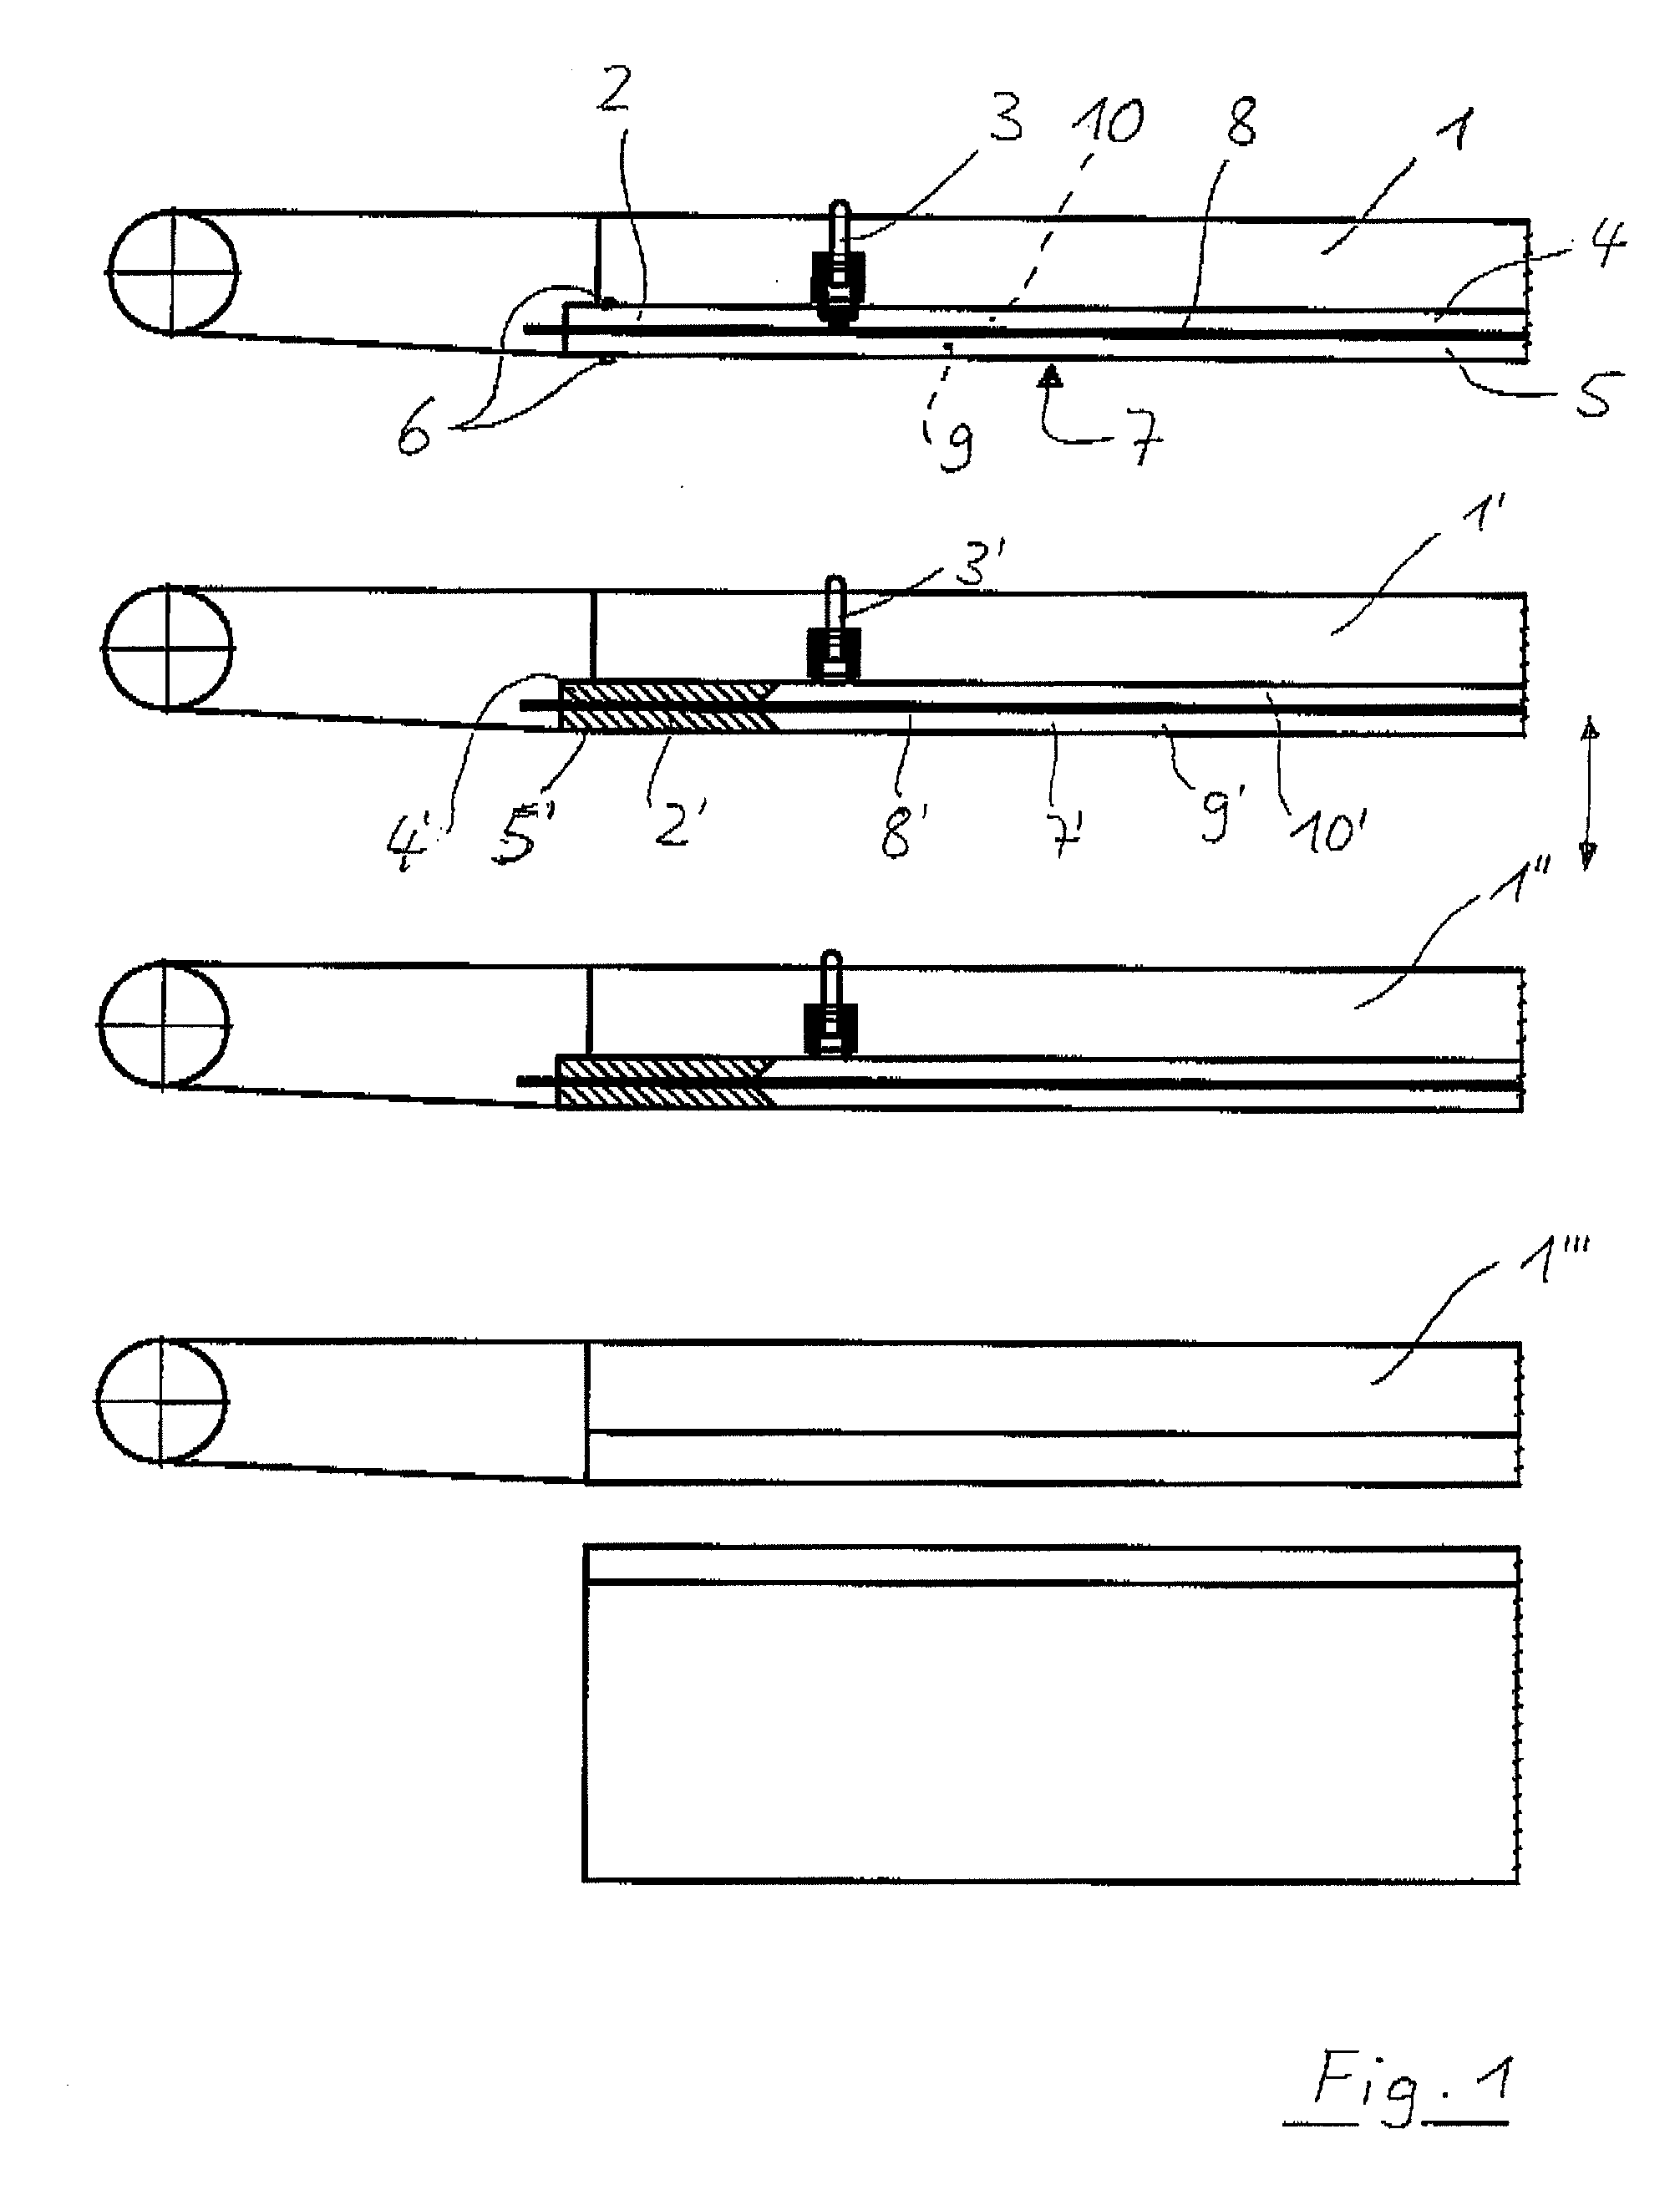 Press and method for laminating essentially plate-shaped workpieces